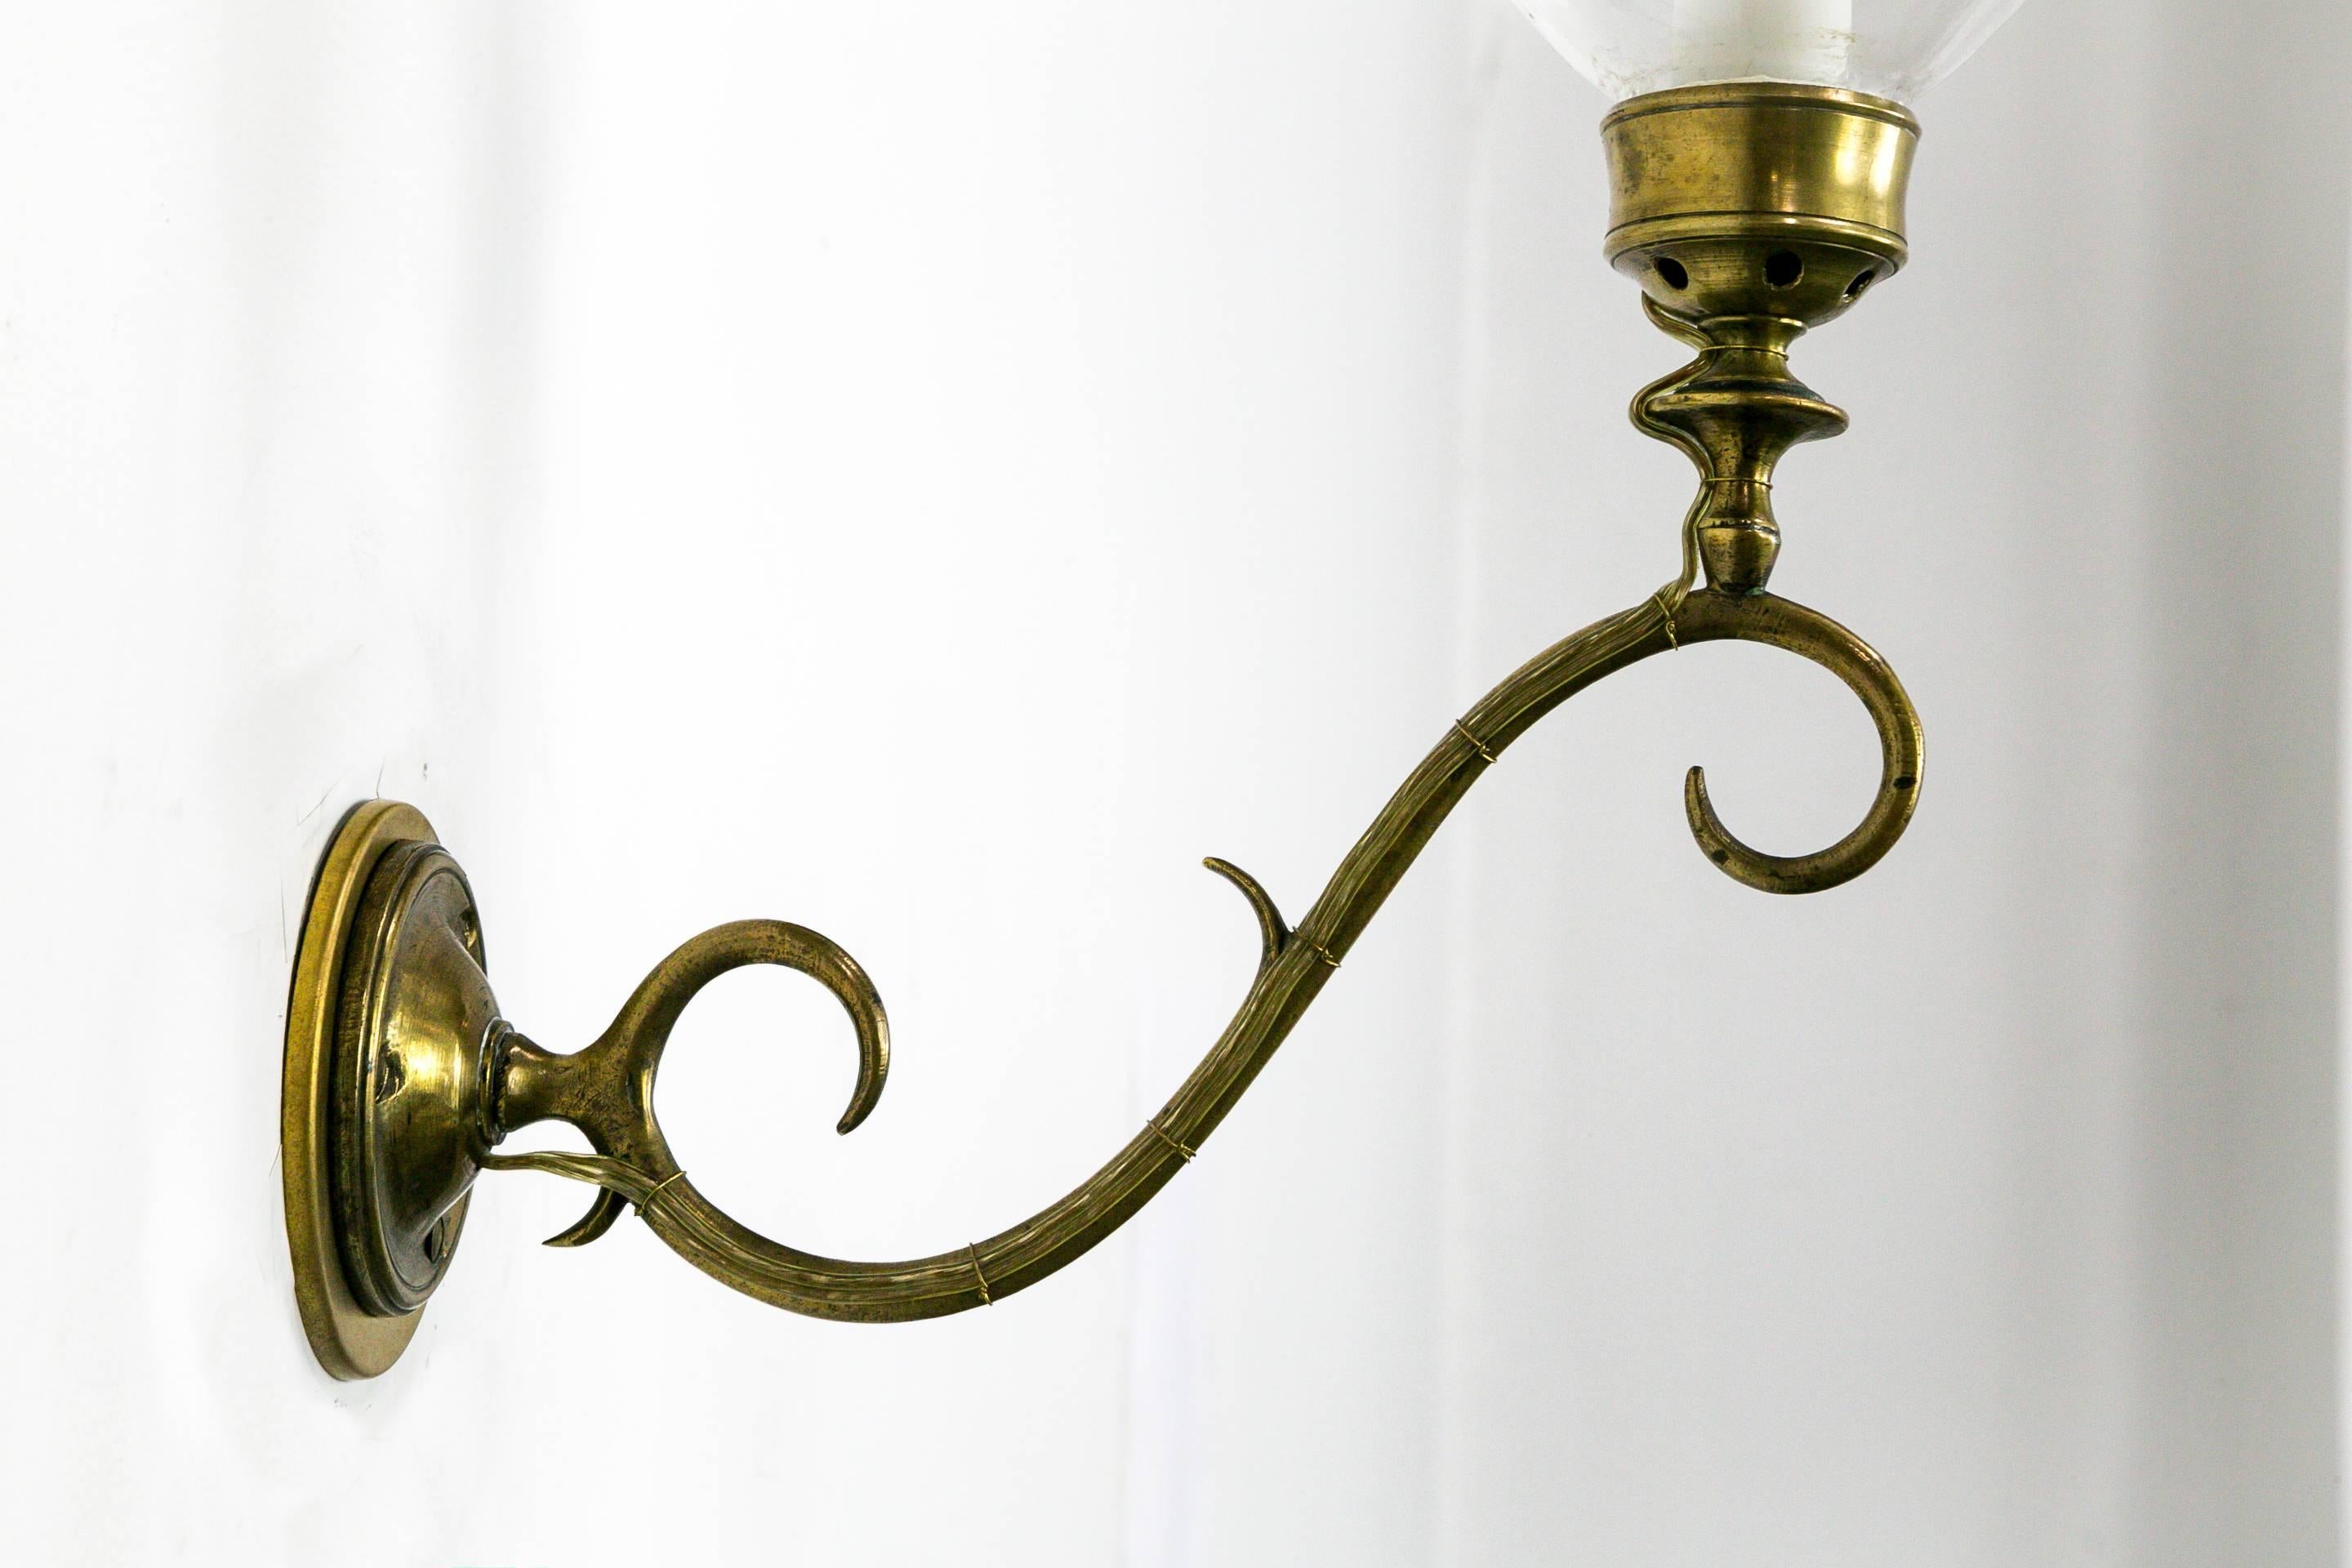 These Anglo-American Hurricane sconces are brass with a refined scroll arm and delicate, hand blown glass shades. The glass and brass complement each other displaying an artfully designed, sophisticated shape, circa 1890. 6